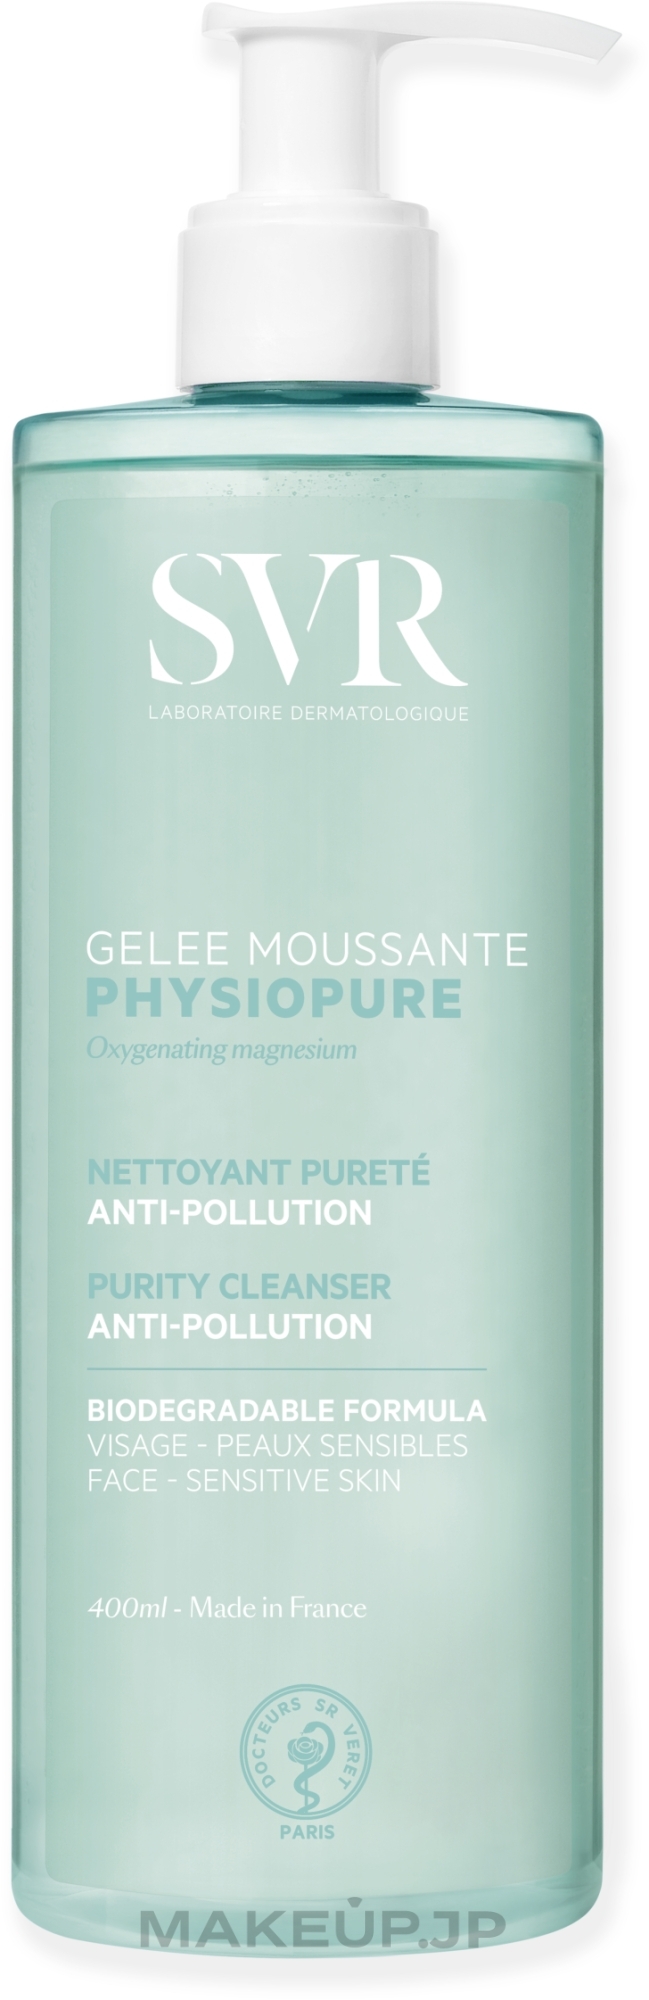 Cleansing Gel - SVR Physiopure Gelee Moussante  — photo 400 ml